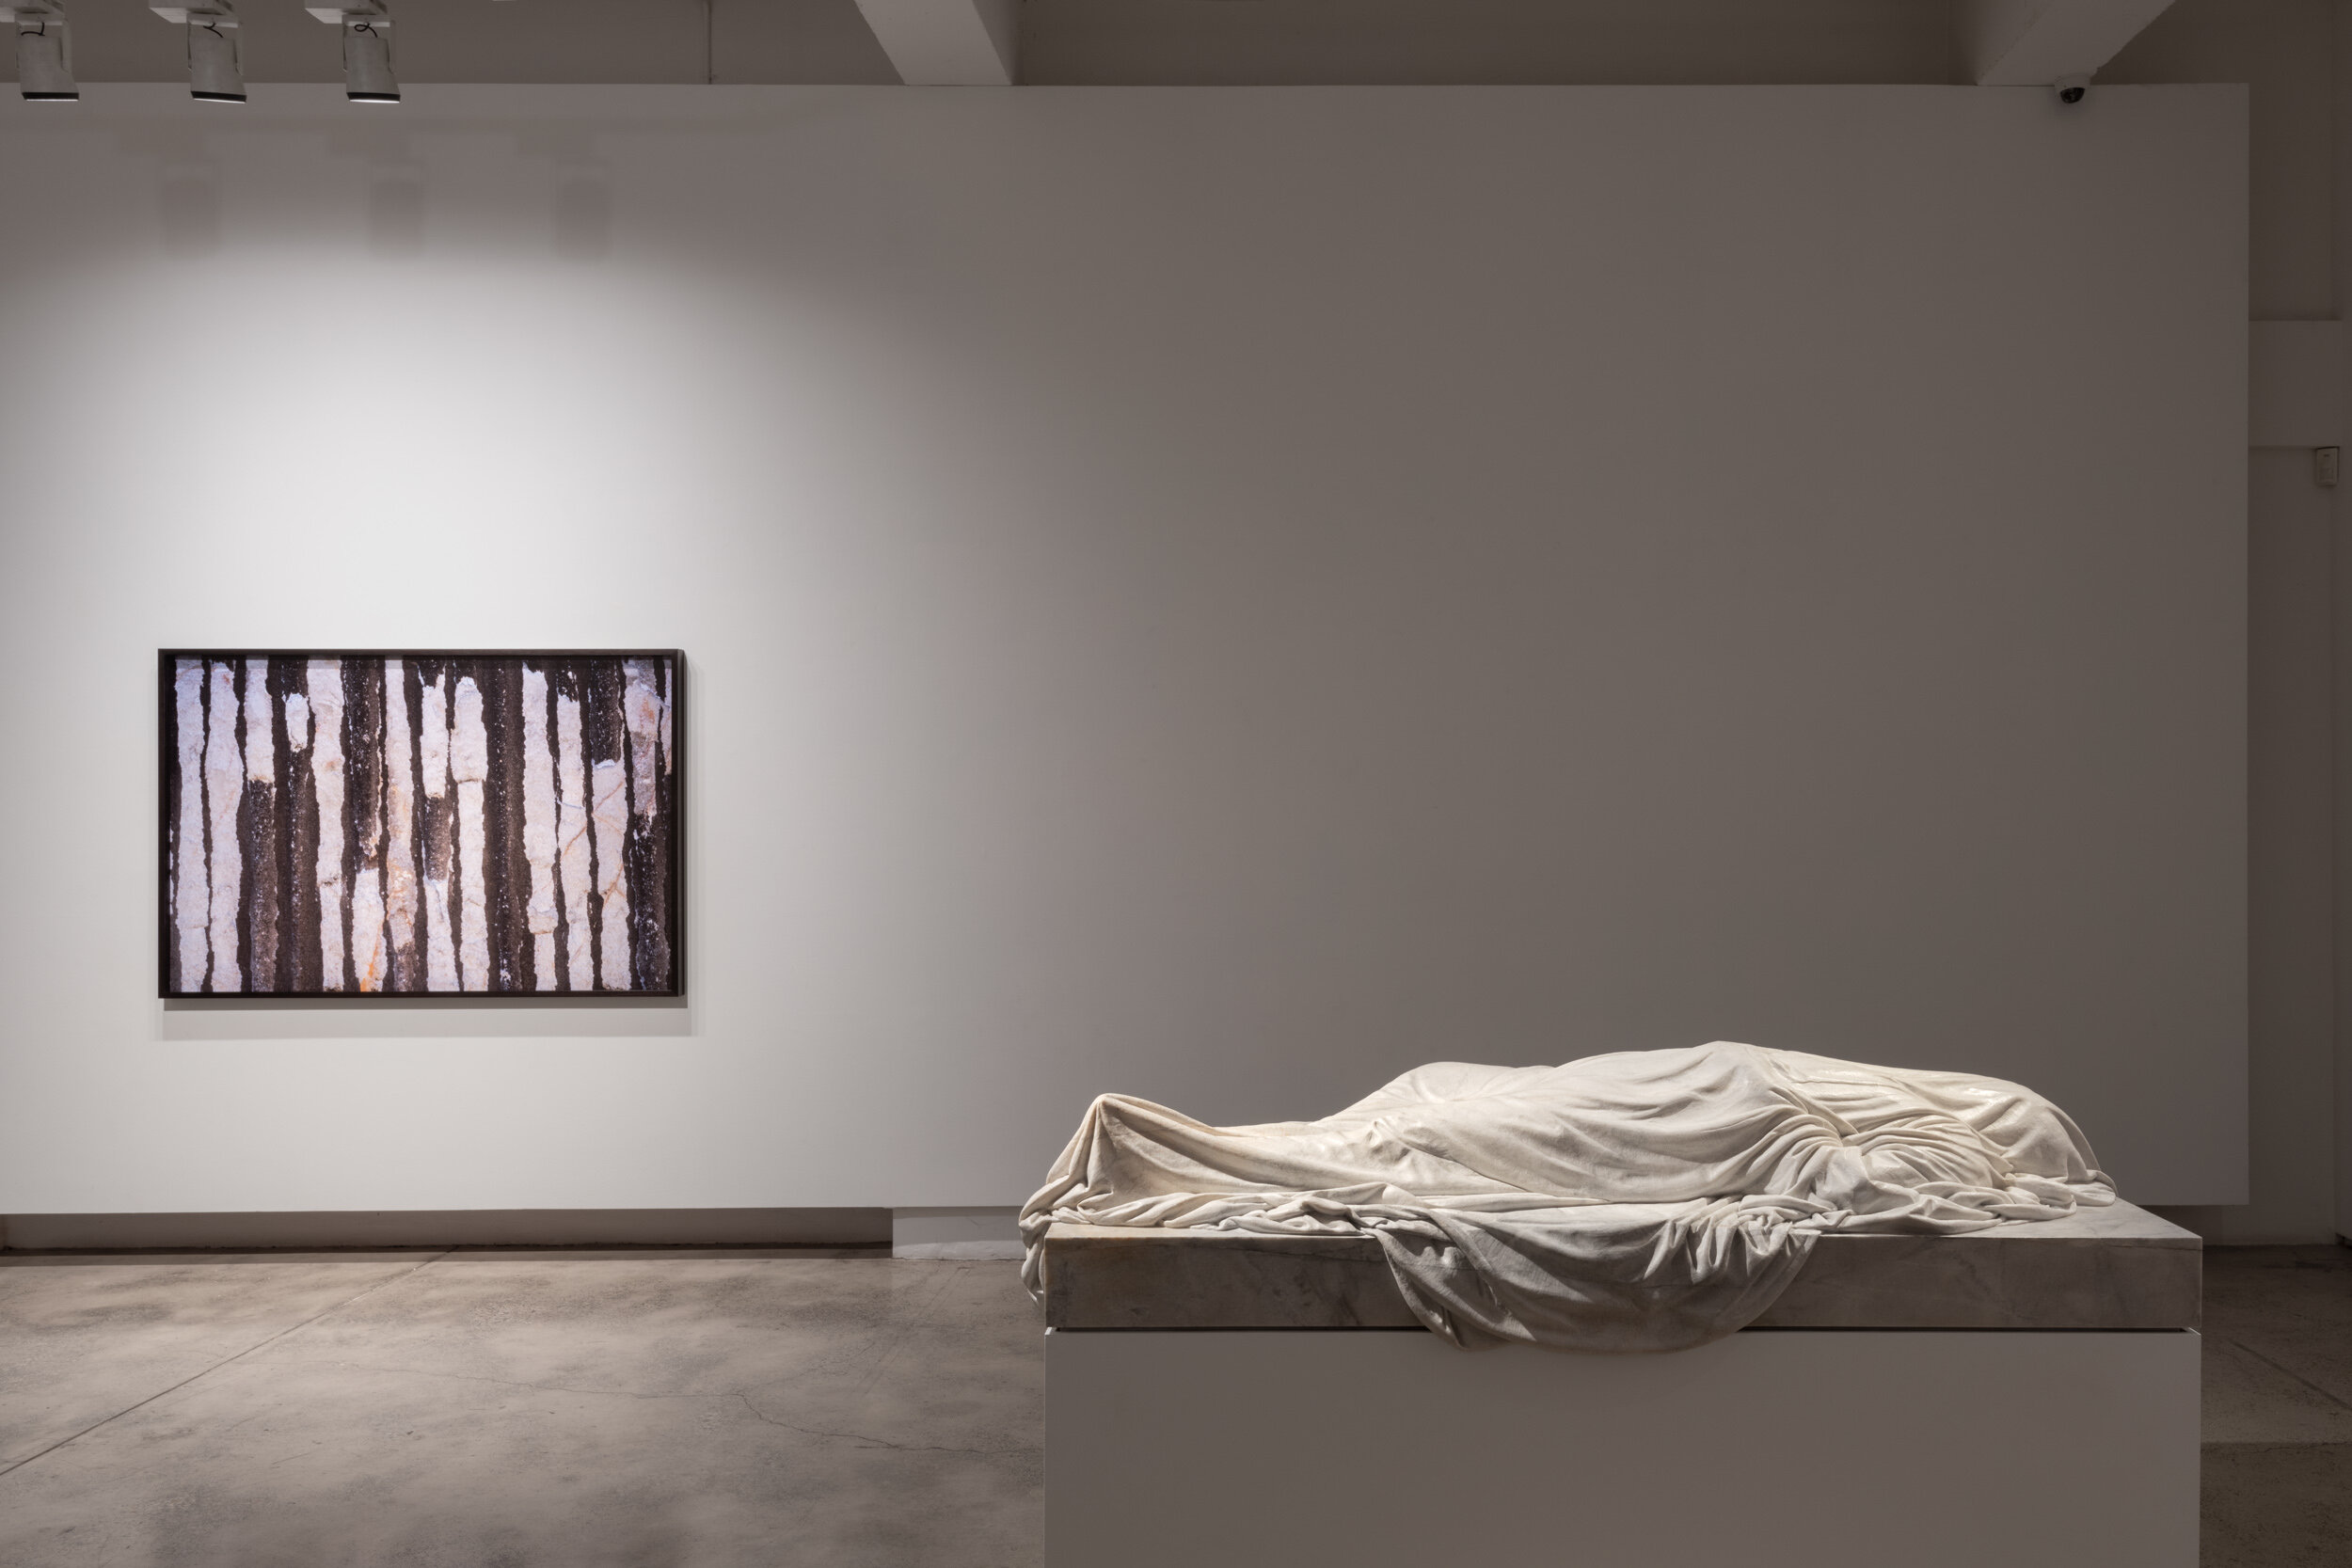  Meet Me Under The Dome, Sullivan+Strumpf, Sydney. 2020  L-R:  The Memory Of Wounds , 2020. Pigment Print On Cotton Rag; 170 X 113 Cm; Edition Of 3 + 2 AP;  The Ghost Of Wombeyan (A History Of Forgetting) , 2020. Wombeyan And Meloccan Jade Green Marb